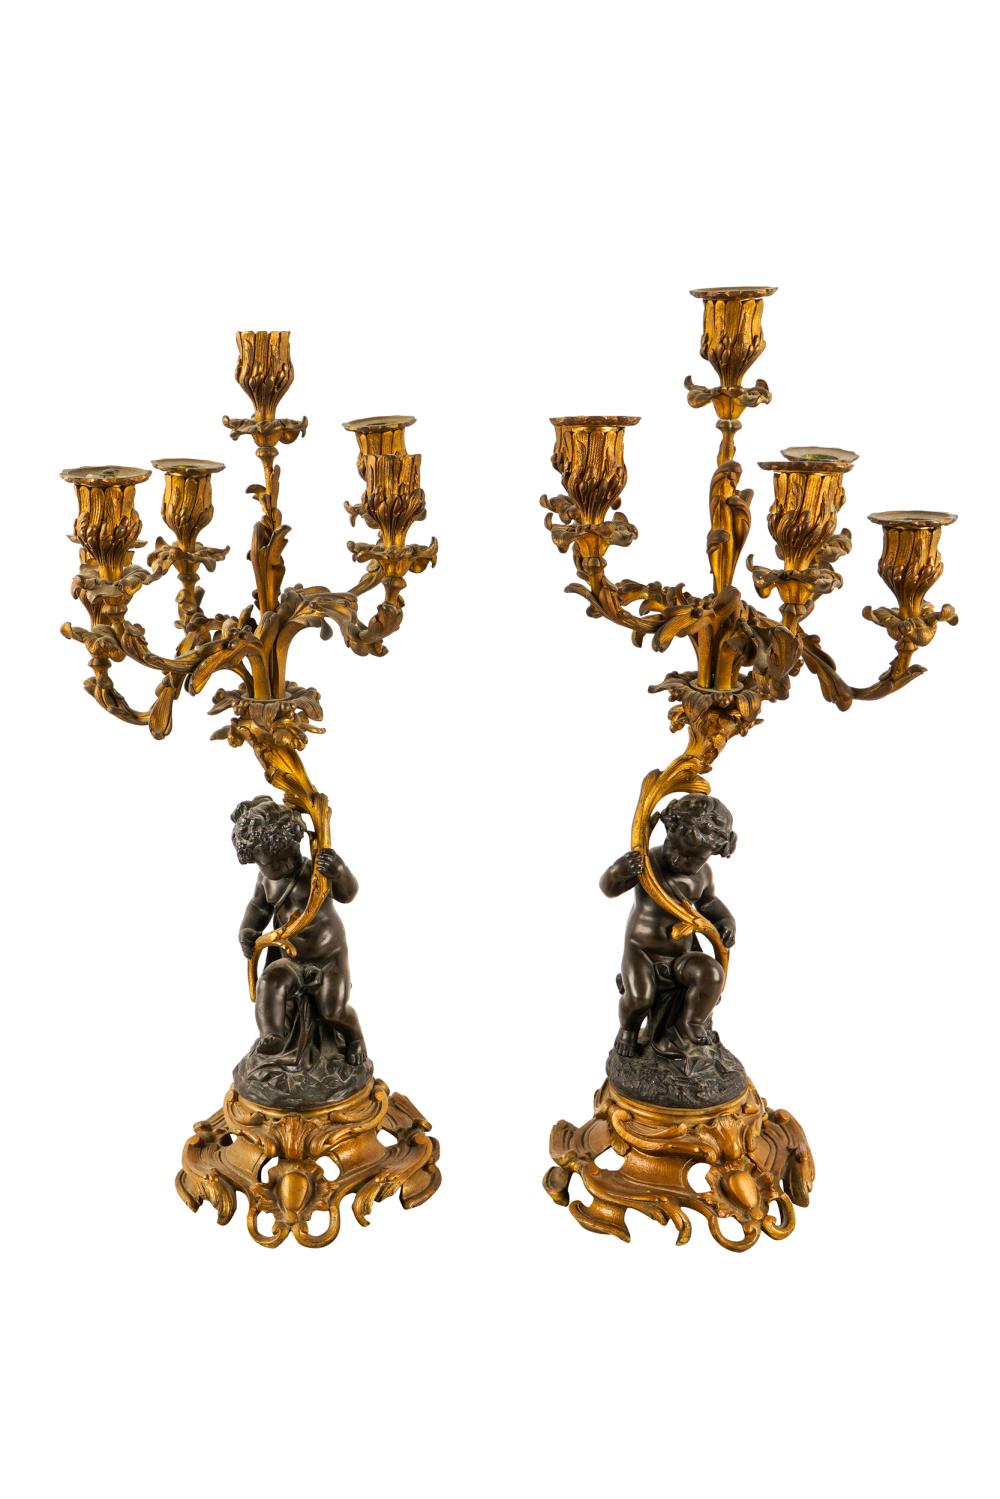 PAIR OF ROCOCO STYLE FIGURAL CANDELABRAbronze